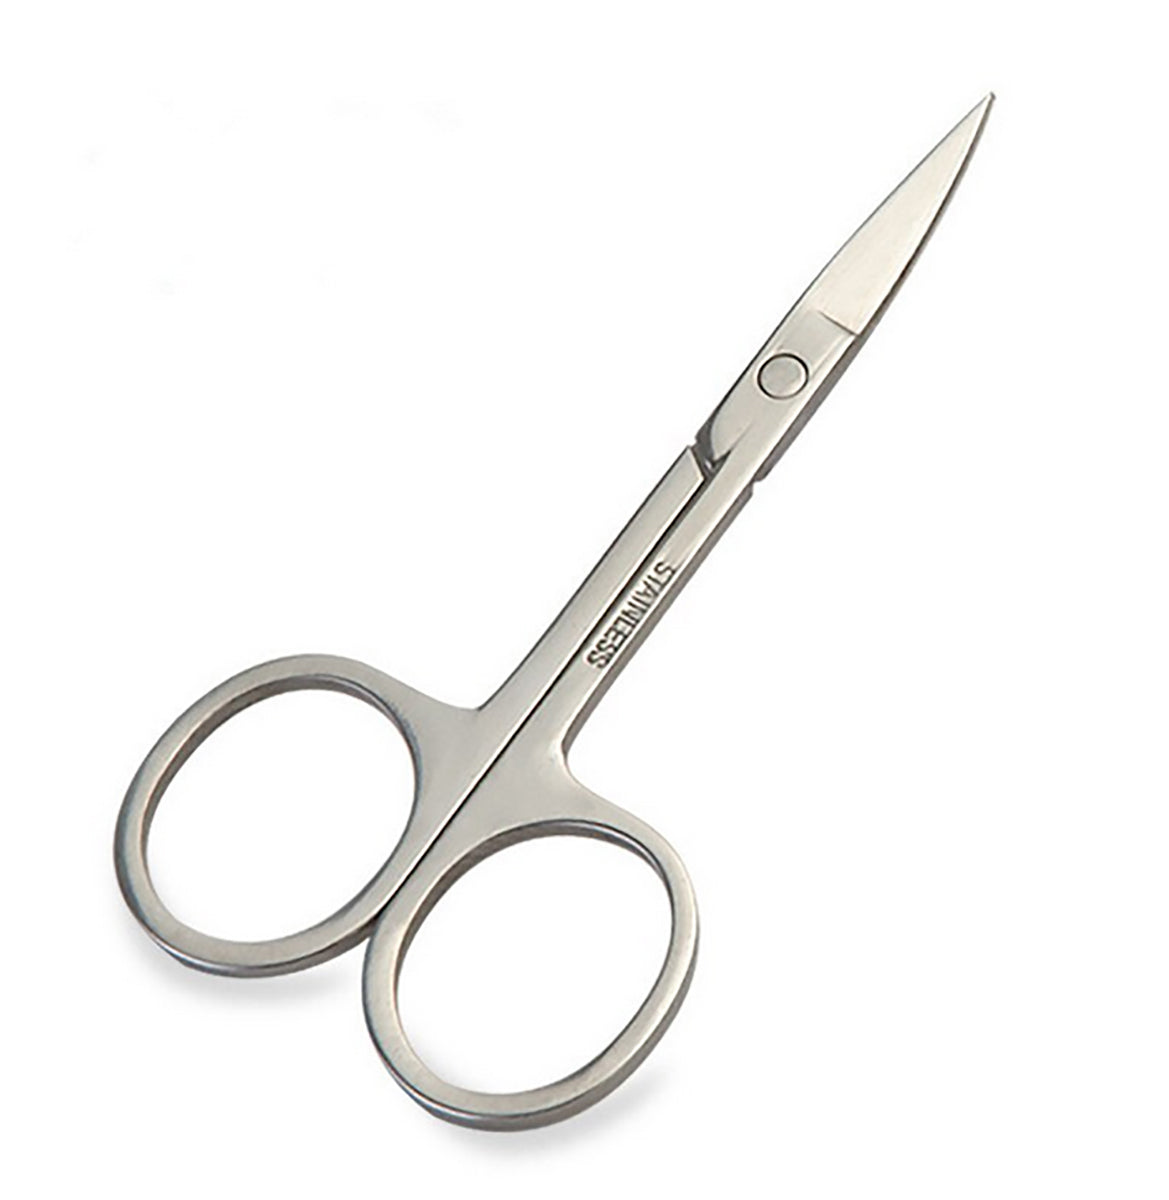 TPFBeauty professional nail scissors made of stainless steel silver